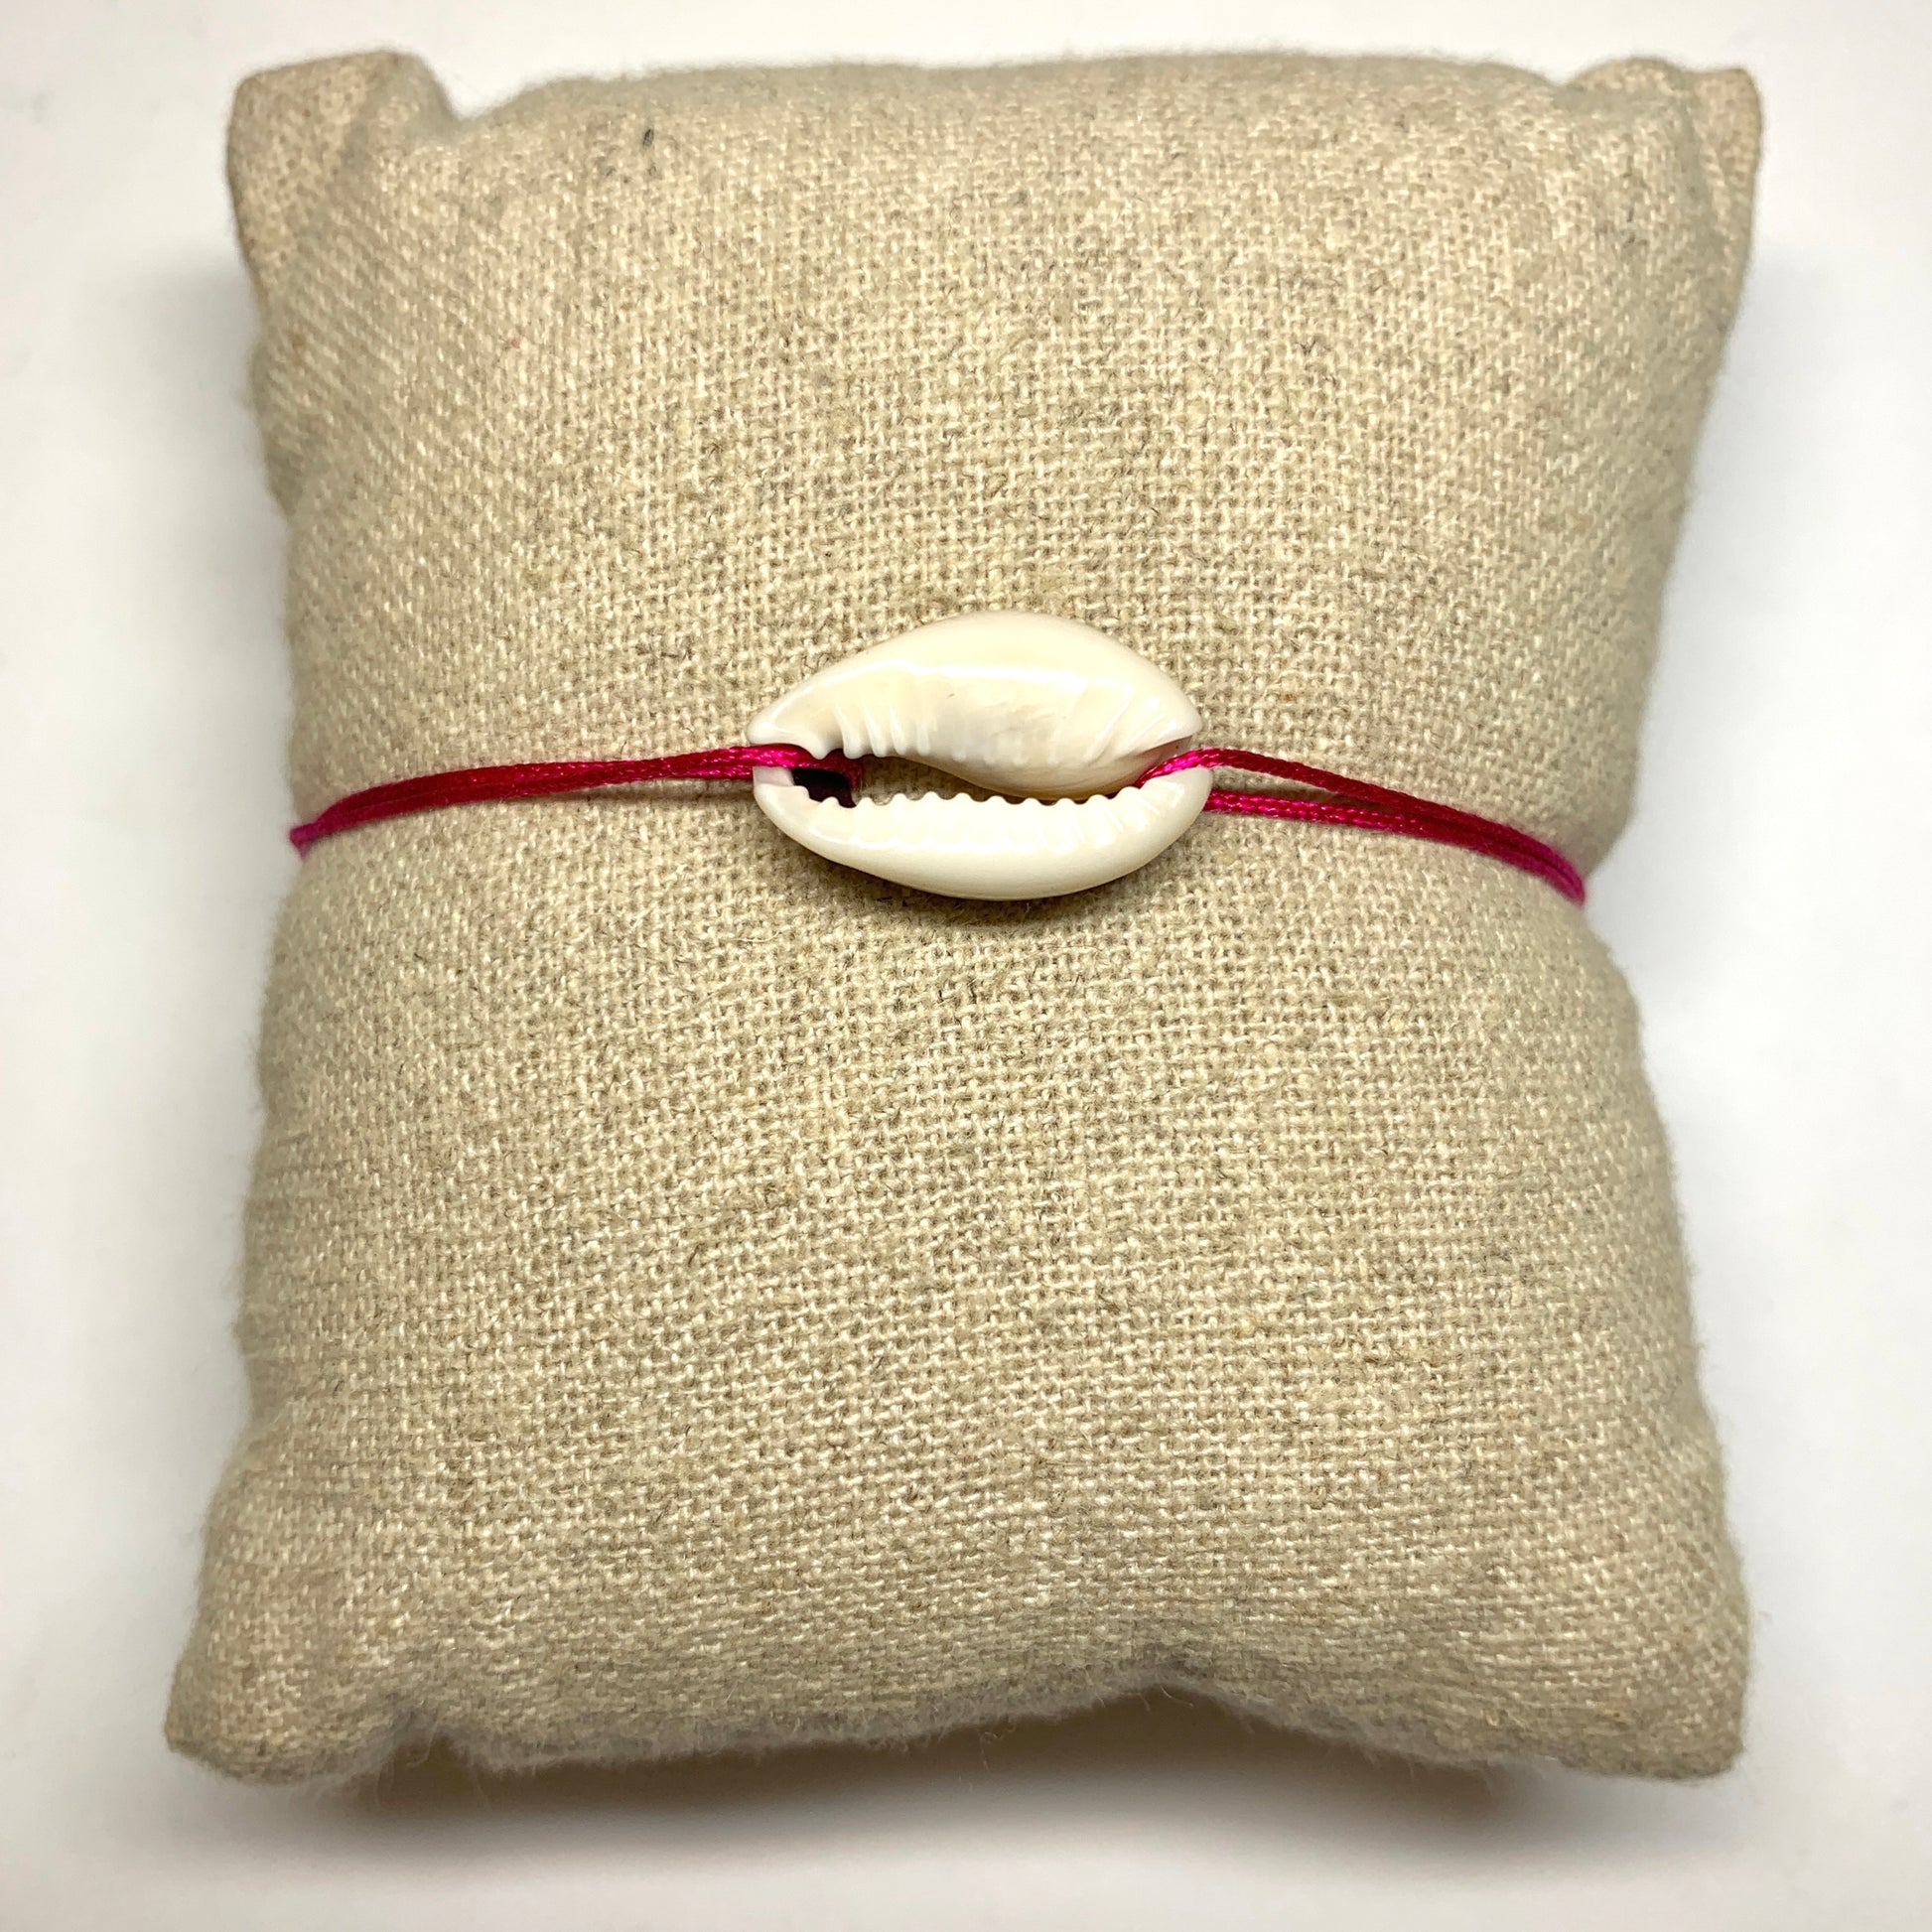 natural cauri shell bracelet handcrafted in France